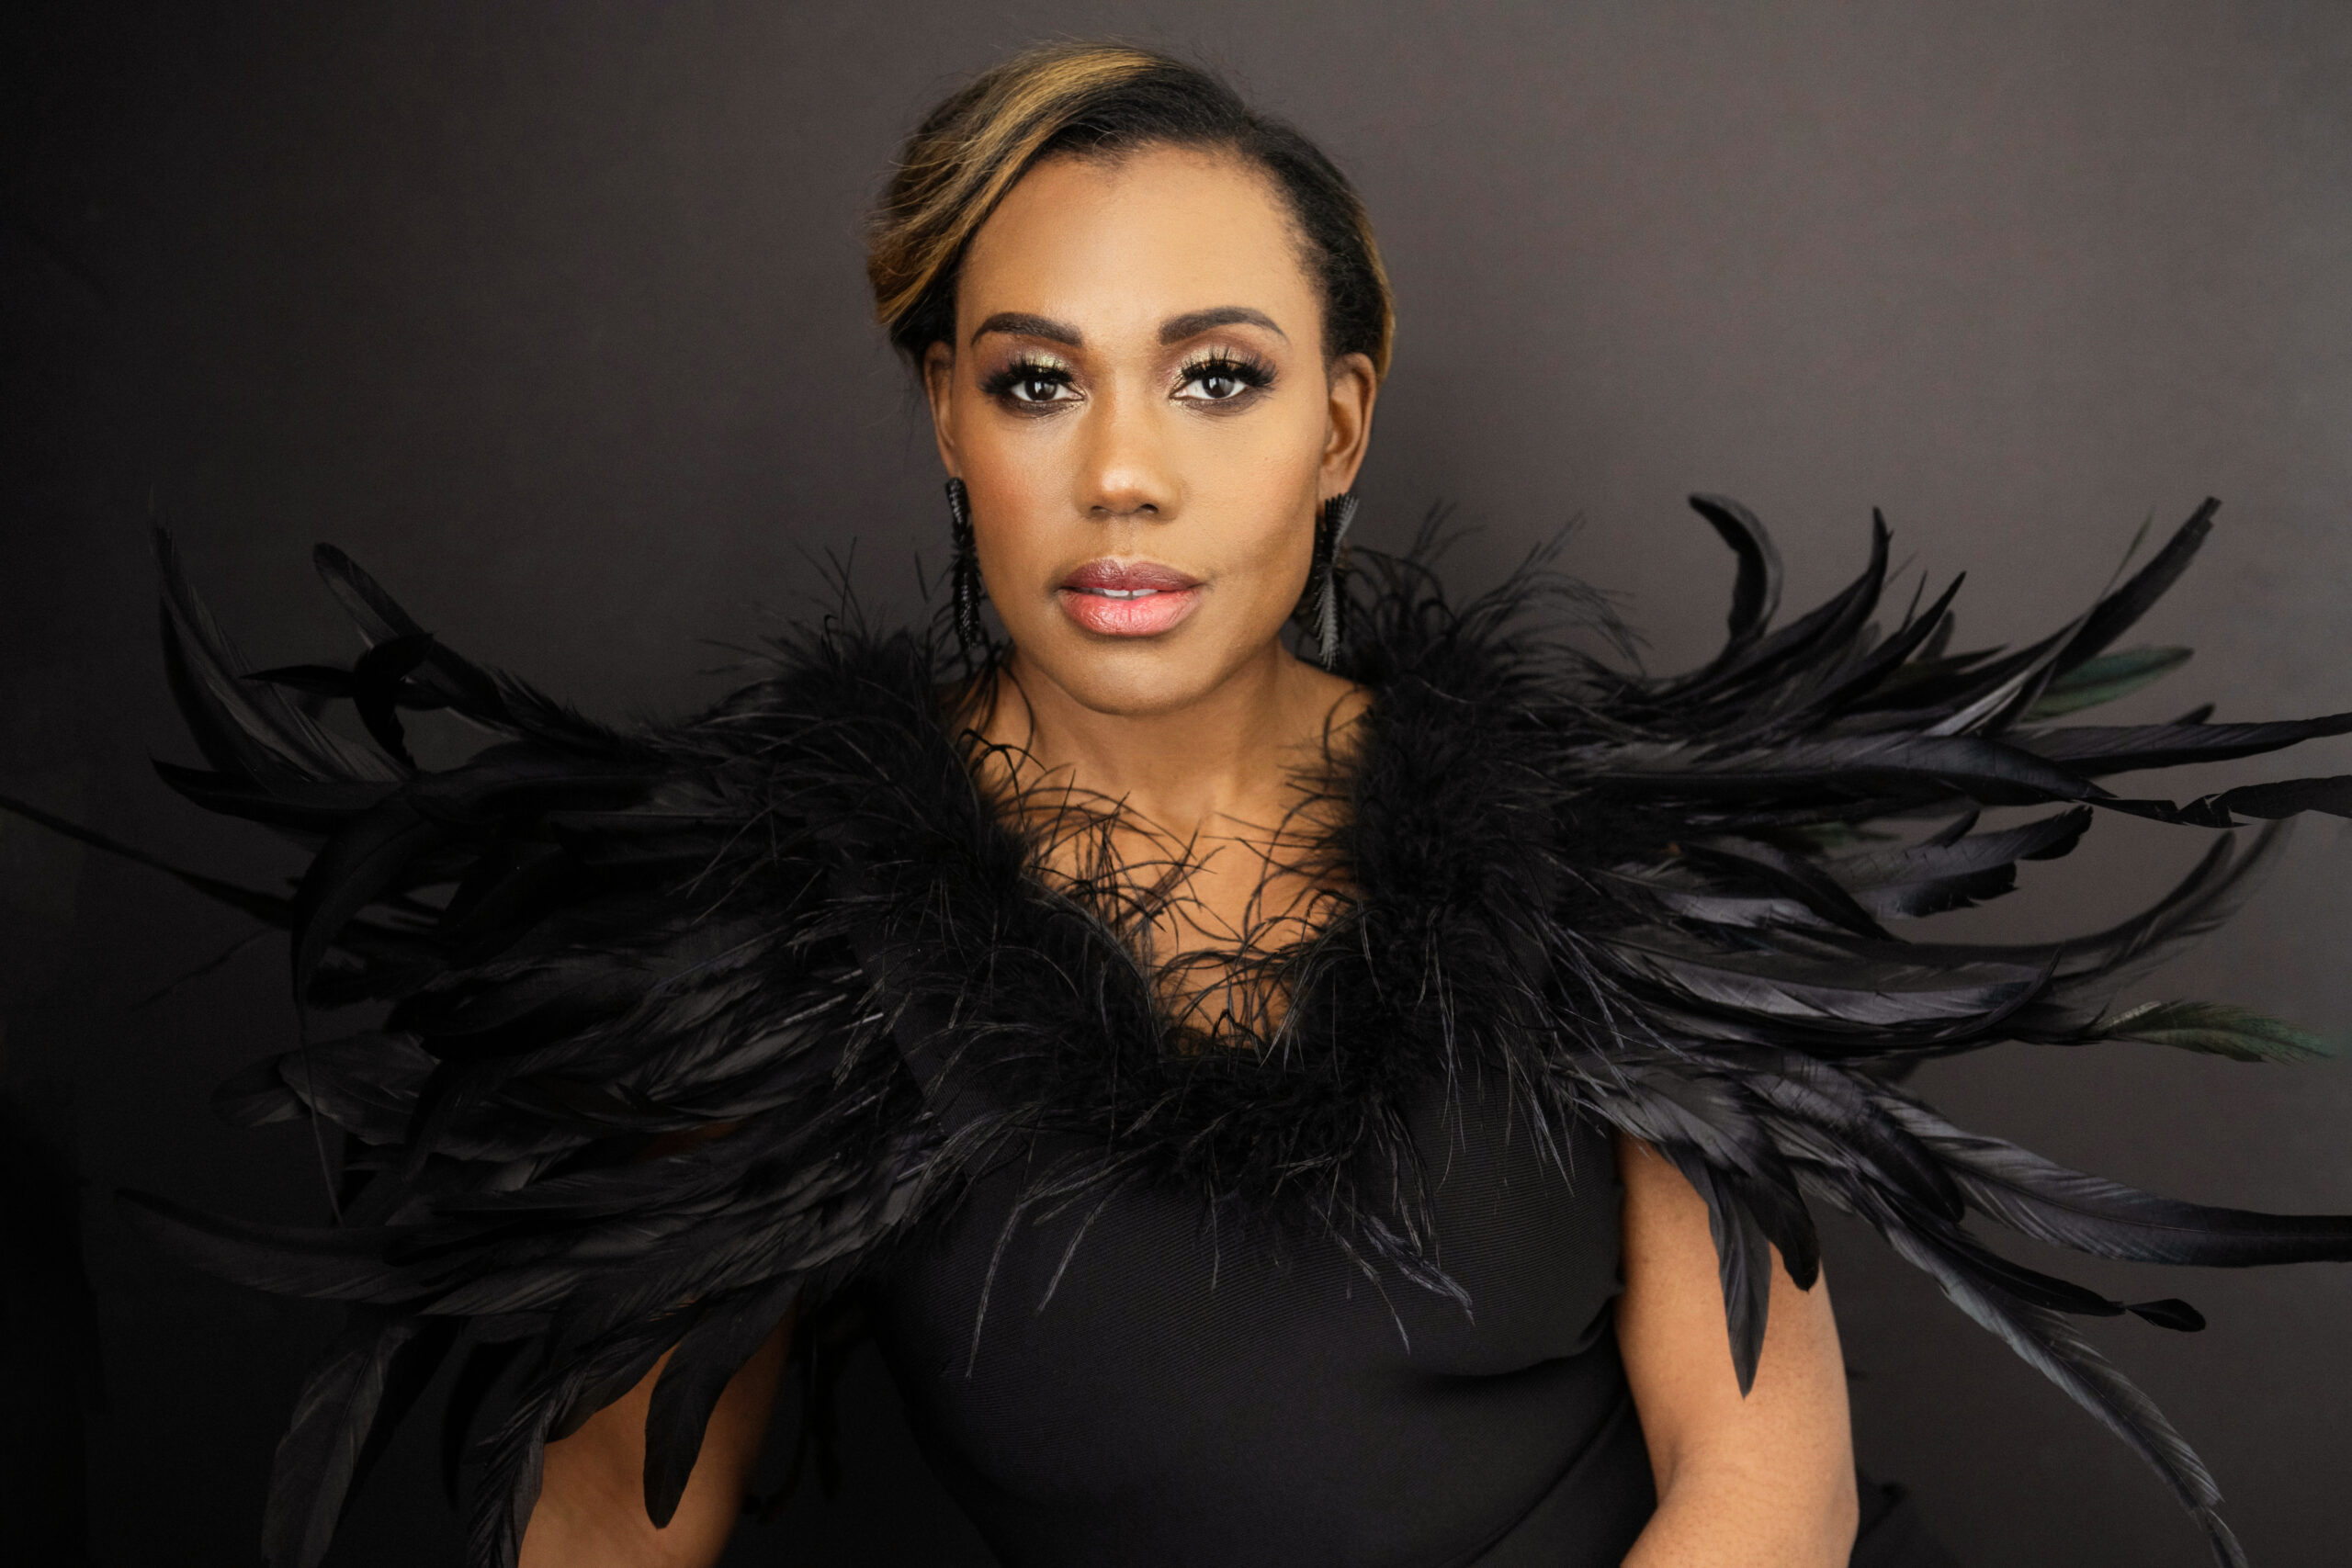 A Black woman with Black hair pulled back wearing a Black dress with a Black feathered boa.